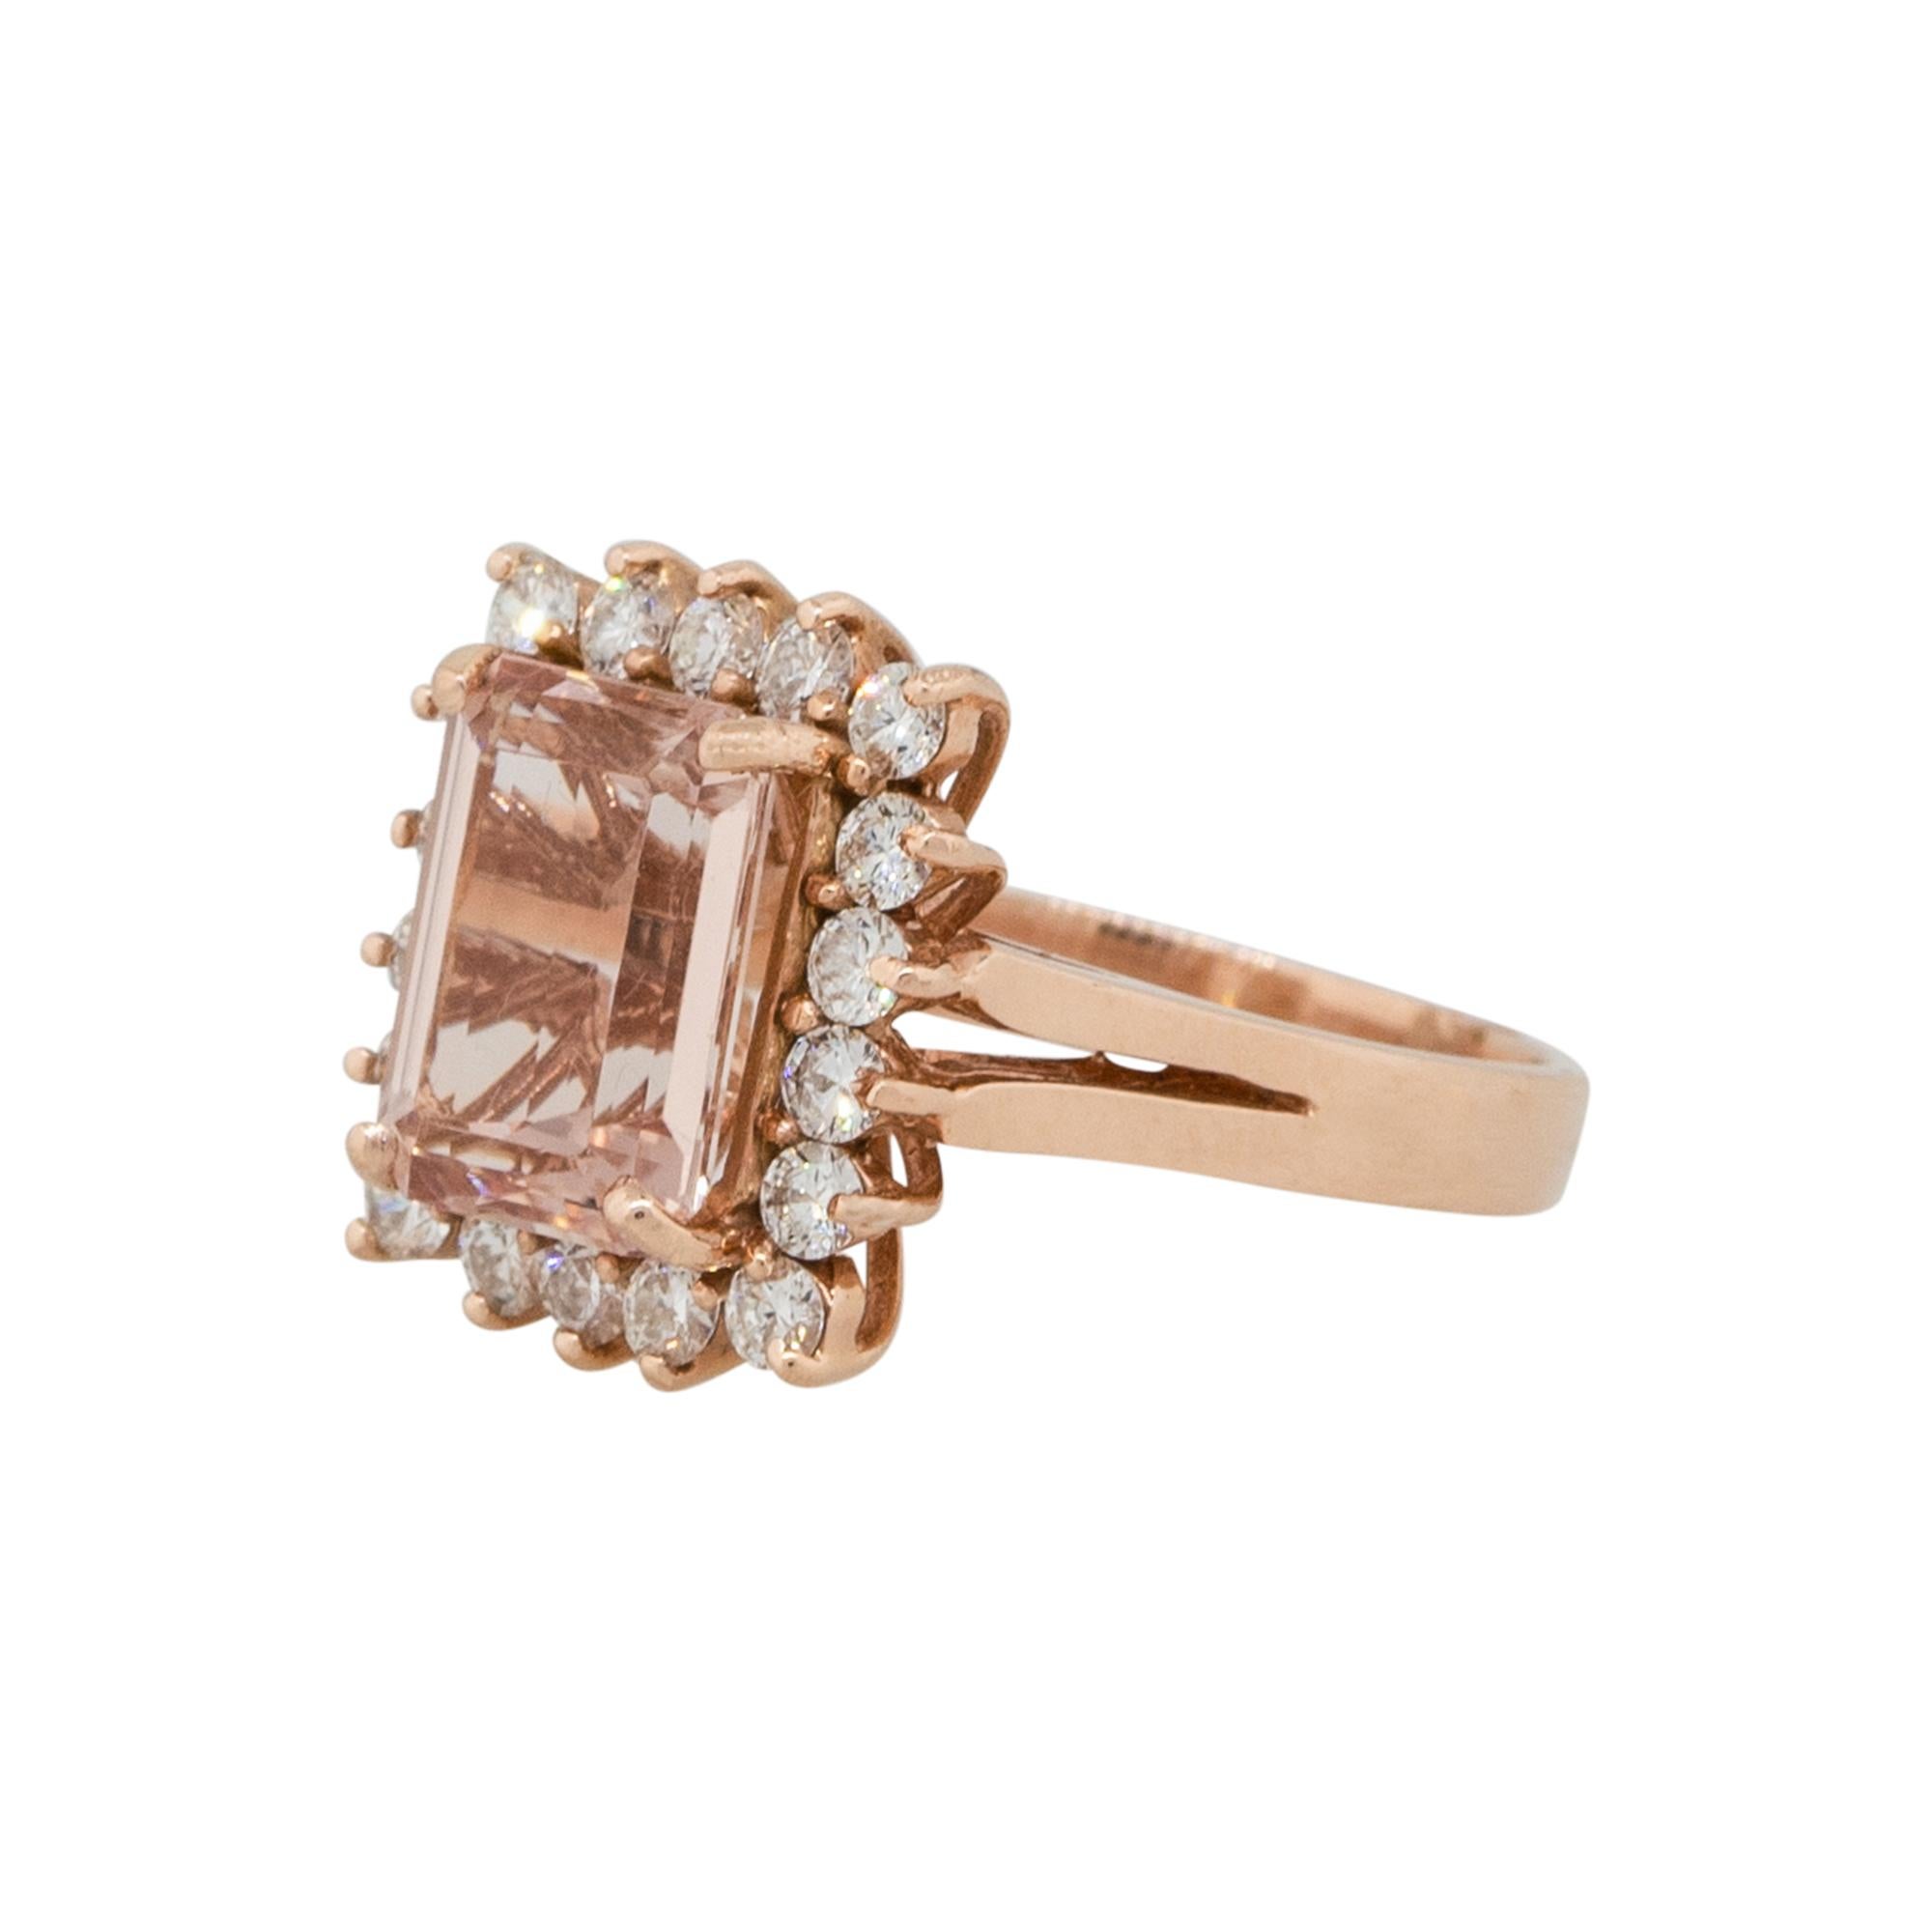 Material: 14k Rose Gold
Diamond Details: Approx. 0.88ctw of round cut Diamonds. Diamonds are G/H in color and VS in clarity
Gemstone Details: Approx. 3.93ctw emerald cut Morganite gemstone
Size: 7
Total weight: 6.2g (4.0dwt)
Measurements: 0.75